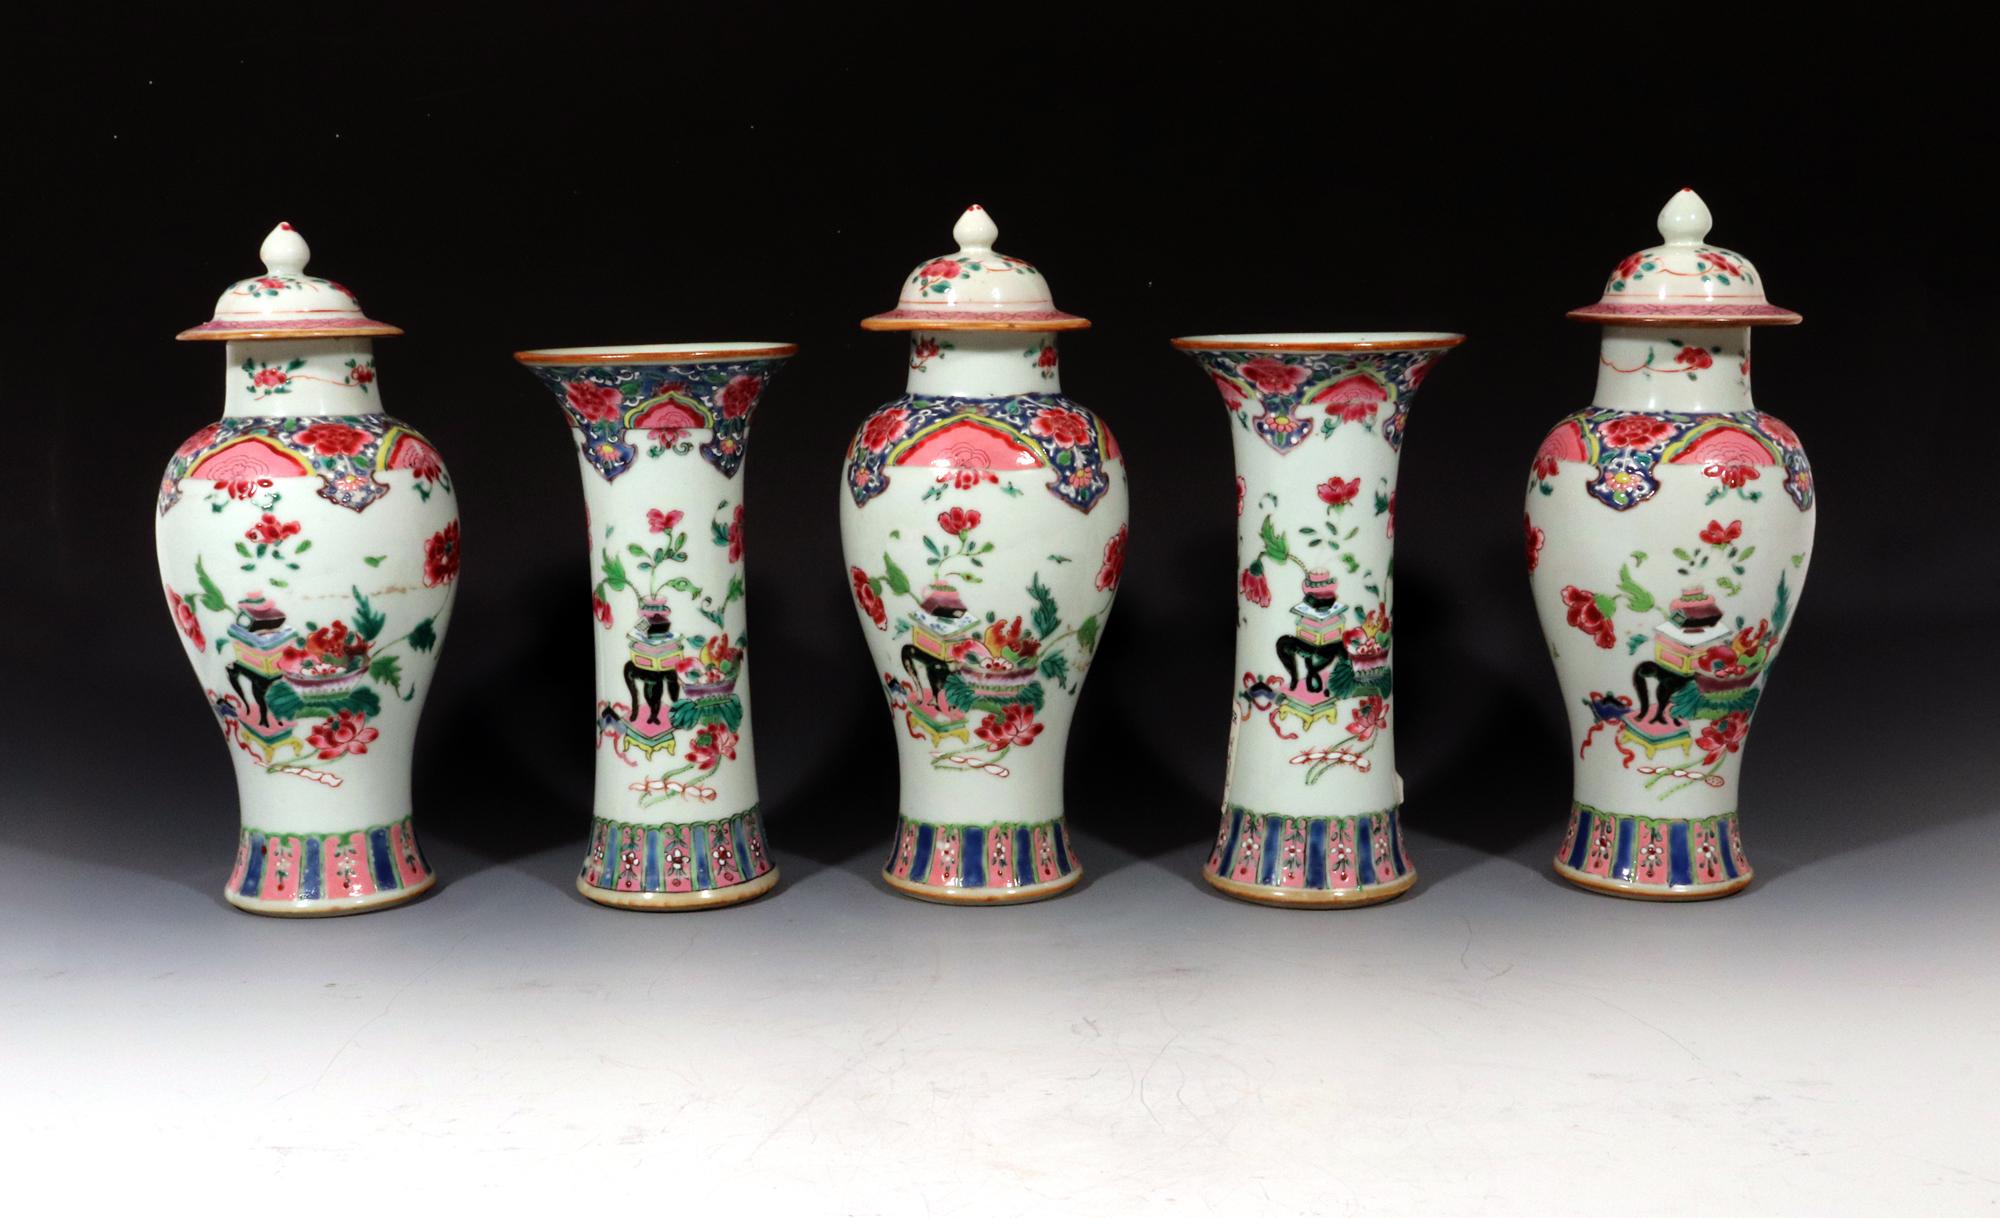 Chinese Export Five Piece Famille Rose Porcelain Garniture,
circa 1730-1750

The garniture of five Chinese Export porcelain vases consists of three covered baluster vases and two trumpet-form vases. They are all painted with groupings of precious